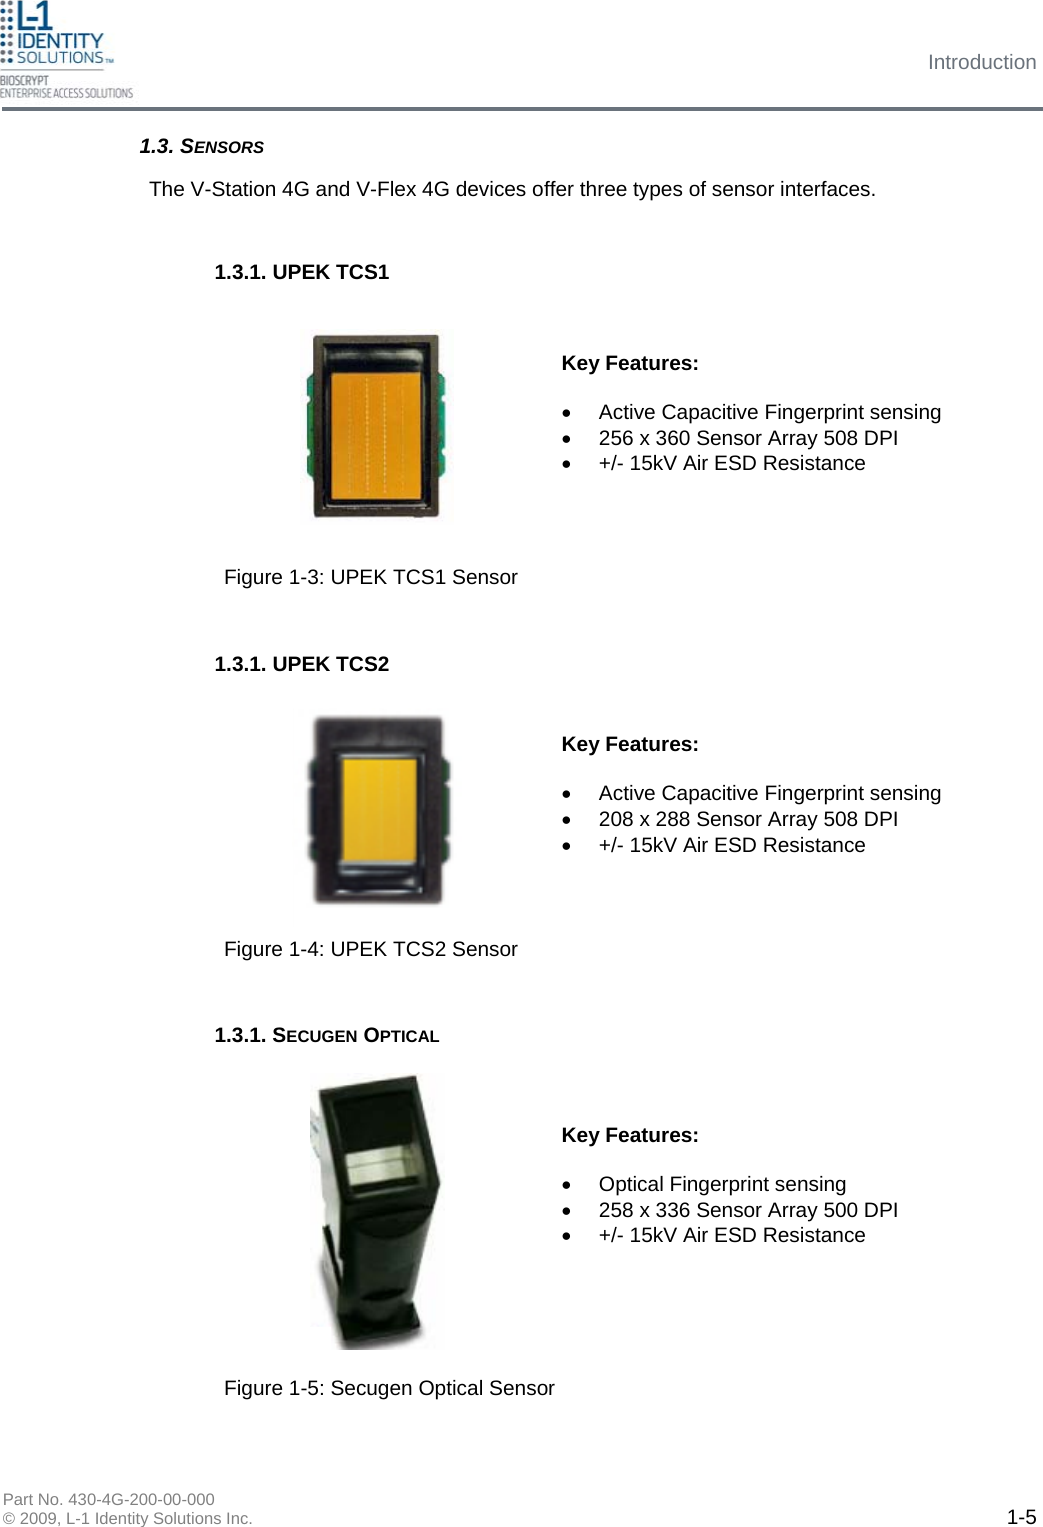 Introduction Part No. 430-4G-200-00-000 © 2009, L-1 Identity Solutions Inc.  1-5 The V-Station 4G and V-Flex 4G devices offer three types of sensor interfaces. Key Features:  •  Active Capacitive Fingerprint sensing •  256 x 360 Sensor Array 508 DPI •  +/- 15kV Air ESD Resistance Key Features:  •  Active Capacitive Fingerprint sensing •  208 x 288 Sensor Array 508 DPI •  +/- 15kV Air ESD Resistance Key Features:  •  Optical Fingerprint sensing •  258 x 336 Sensor Array 500 DPI •  +/- 15kV Air ESD Resistance 1.3. SENSORS 1.3.1. UPEK TCS1 1.3.1. UPEK TCS2 1.3.1. SECUGEN OPTICAL Figure 1-3: UPEK TCS1 Sensor Figure 1-4: UPEK TCS2 Sensor Figure 1-5: Secugen Optical Sensor 